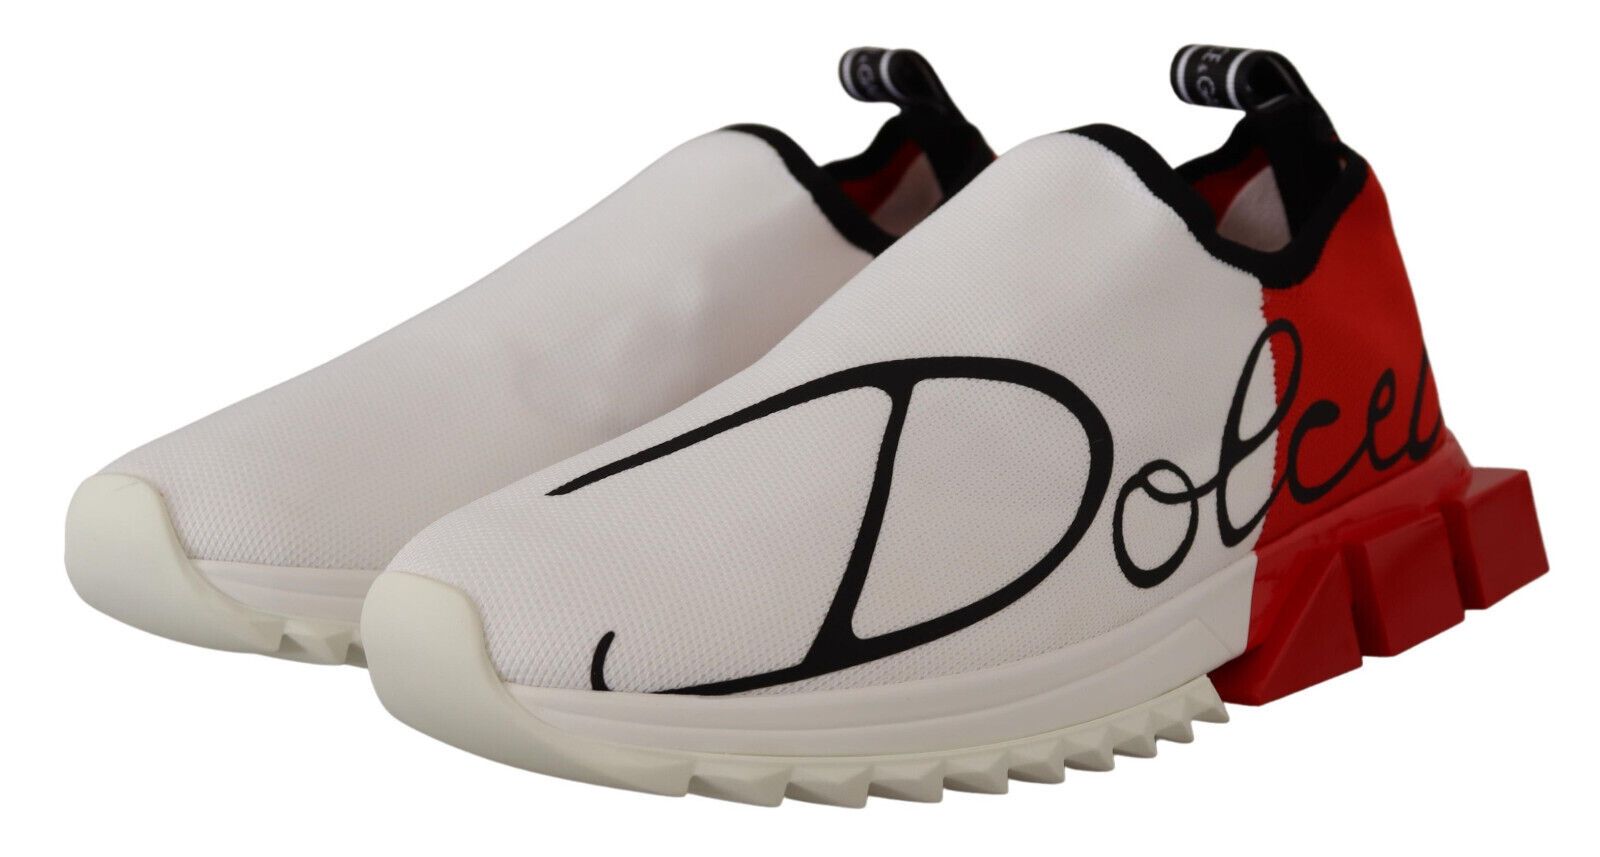 Dolce & Gabbana White Red Sorrento Sandals Sneakers | Fashionsarah.com